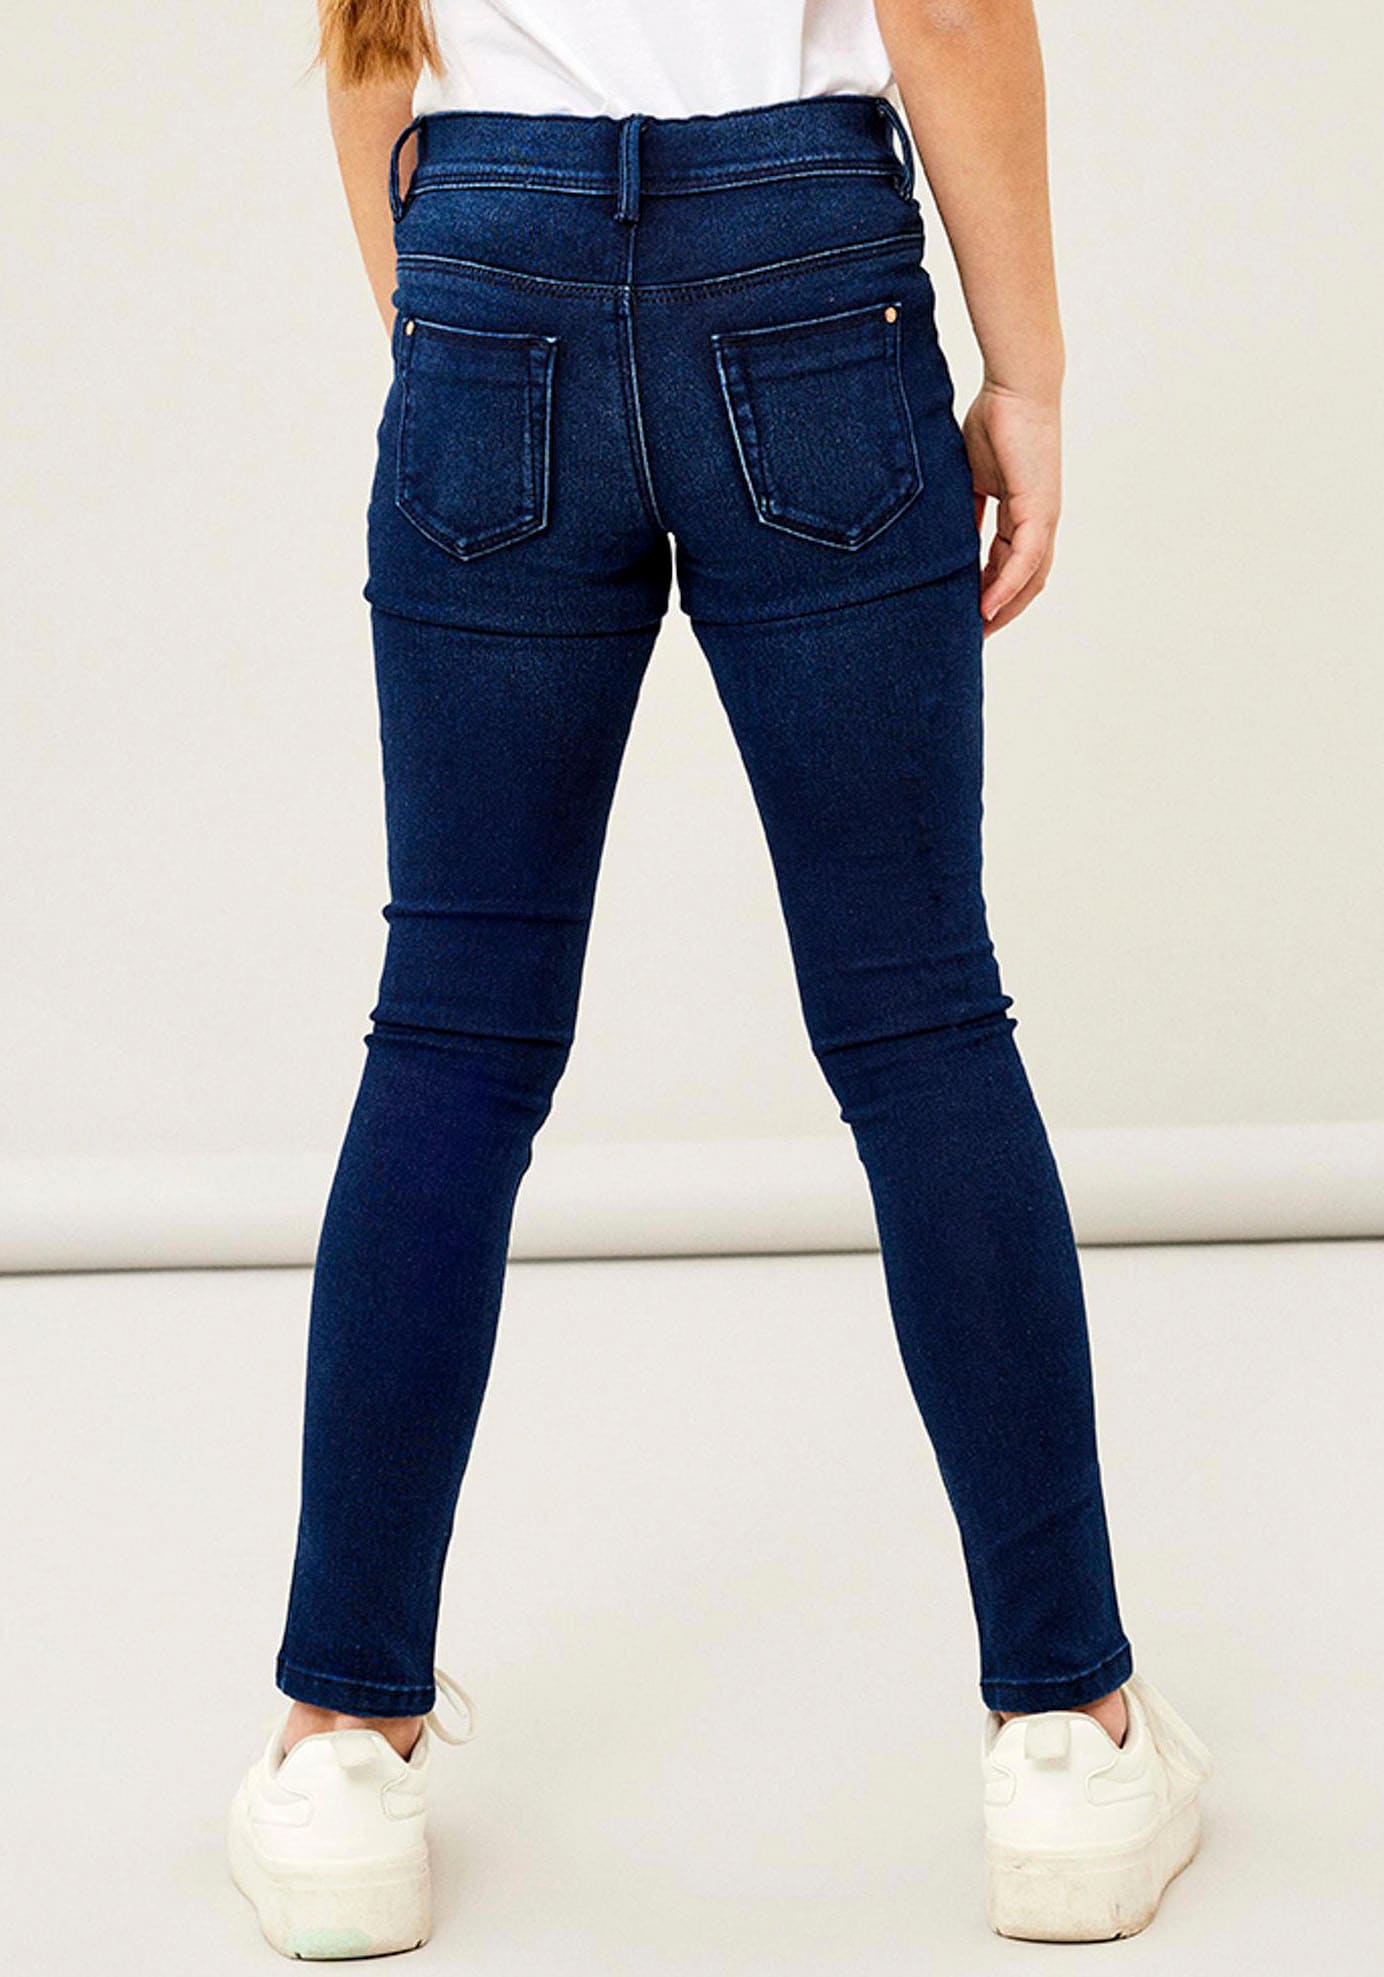 PANT« It »NKFPOLLY Name DNMTAX bestellen Stretch-Jeans